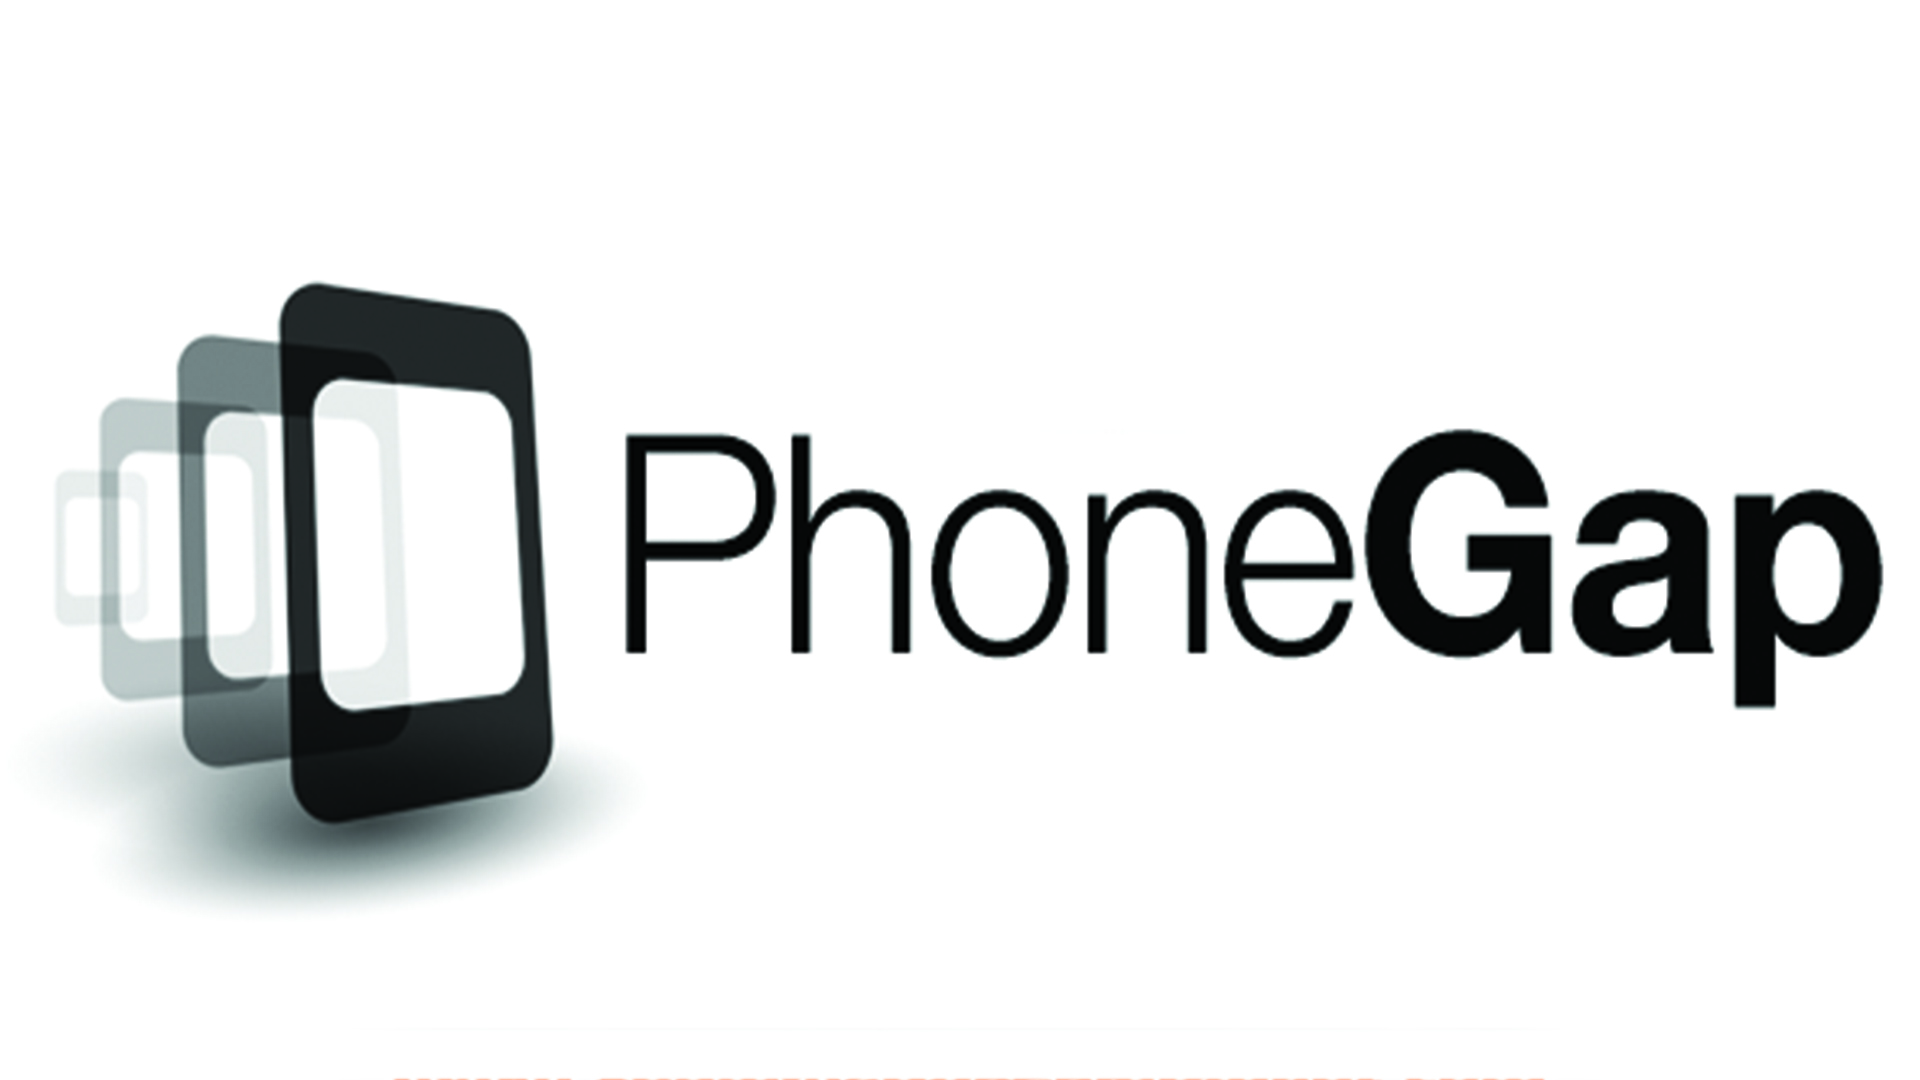 Use Phonegap to Easily Create an App